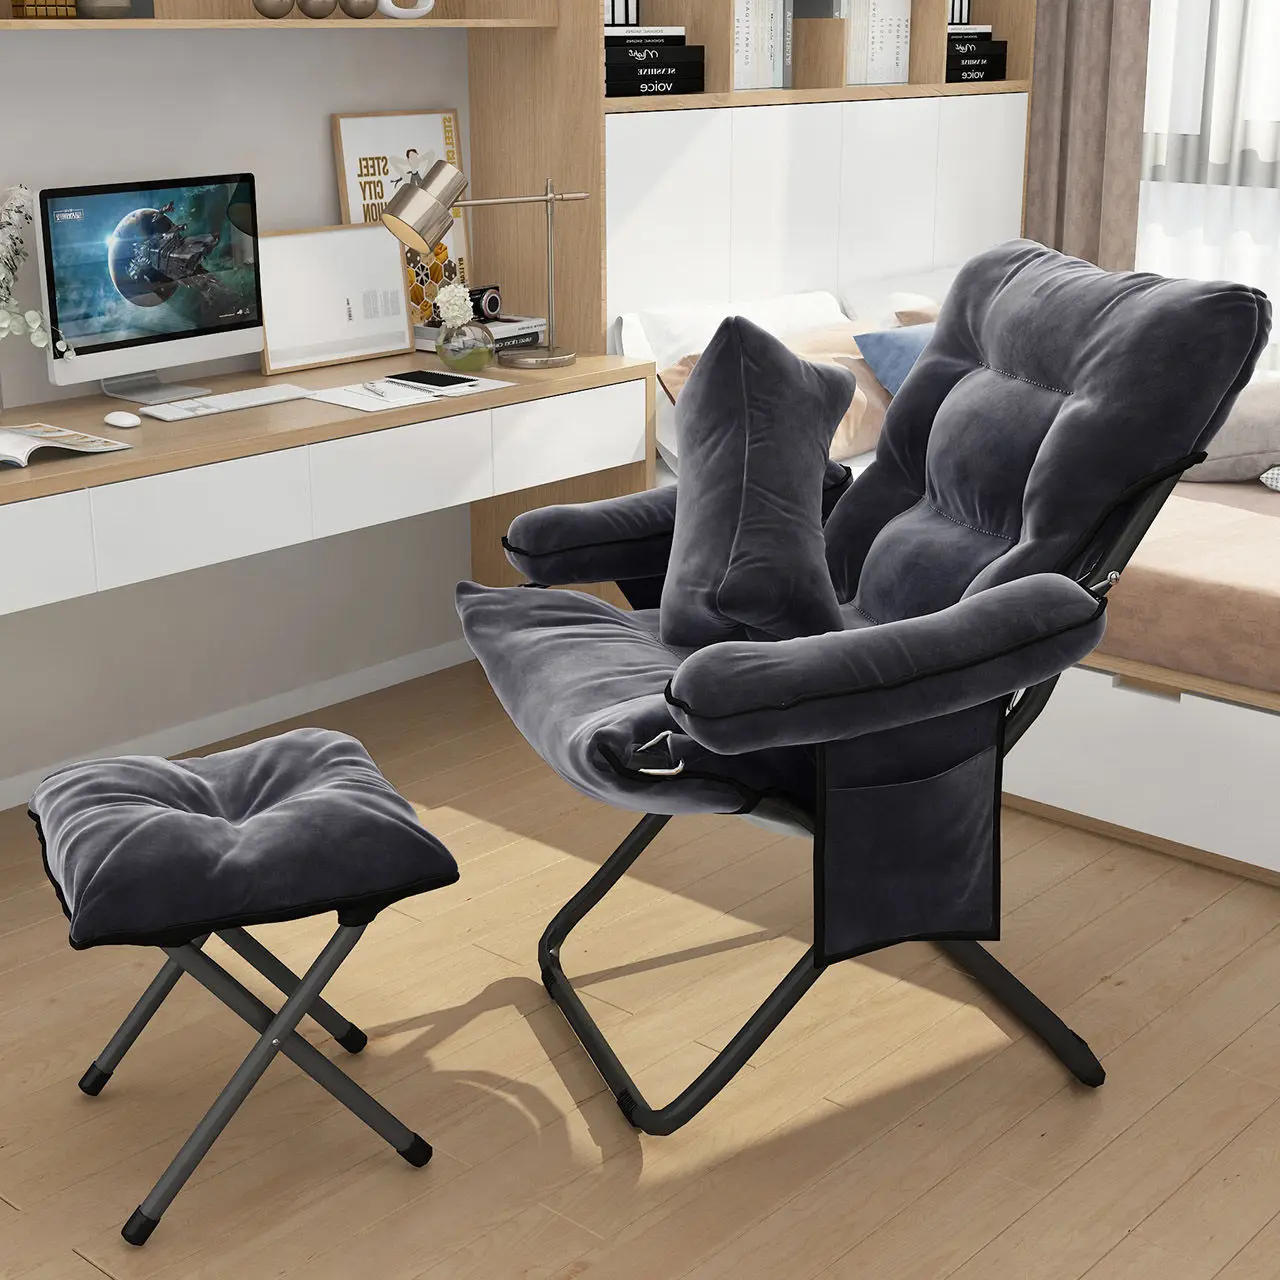 

C74 computer chair backrest home comfortable sedentary desk chair office dormitory college student seat e-sports lazy chair